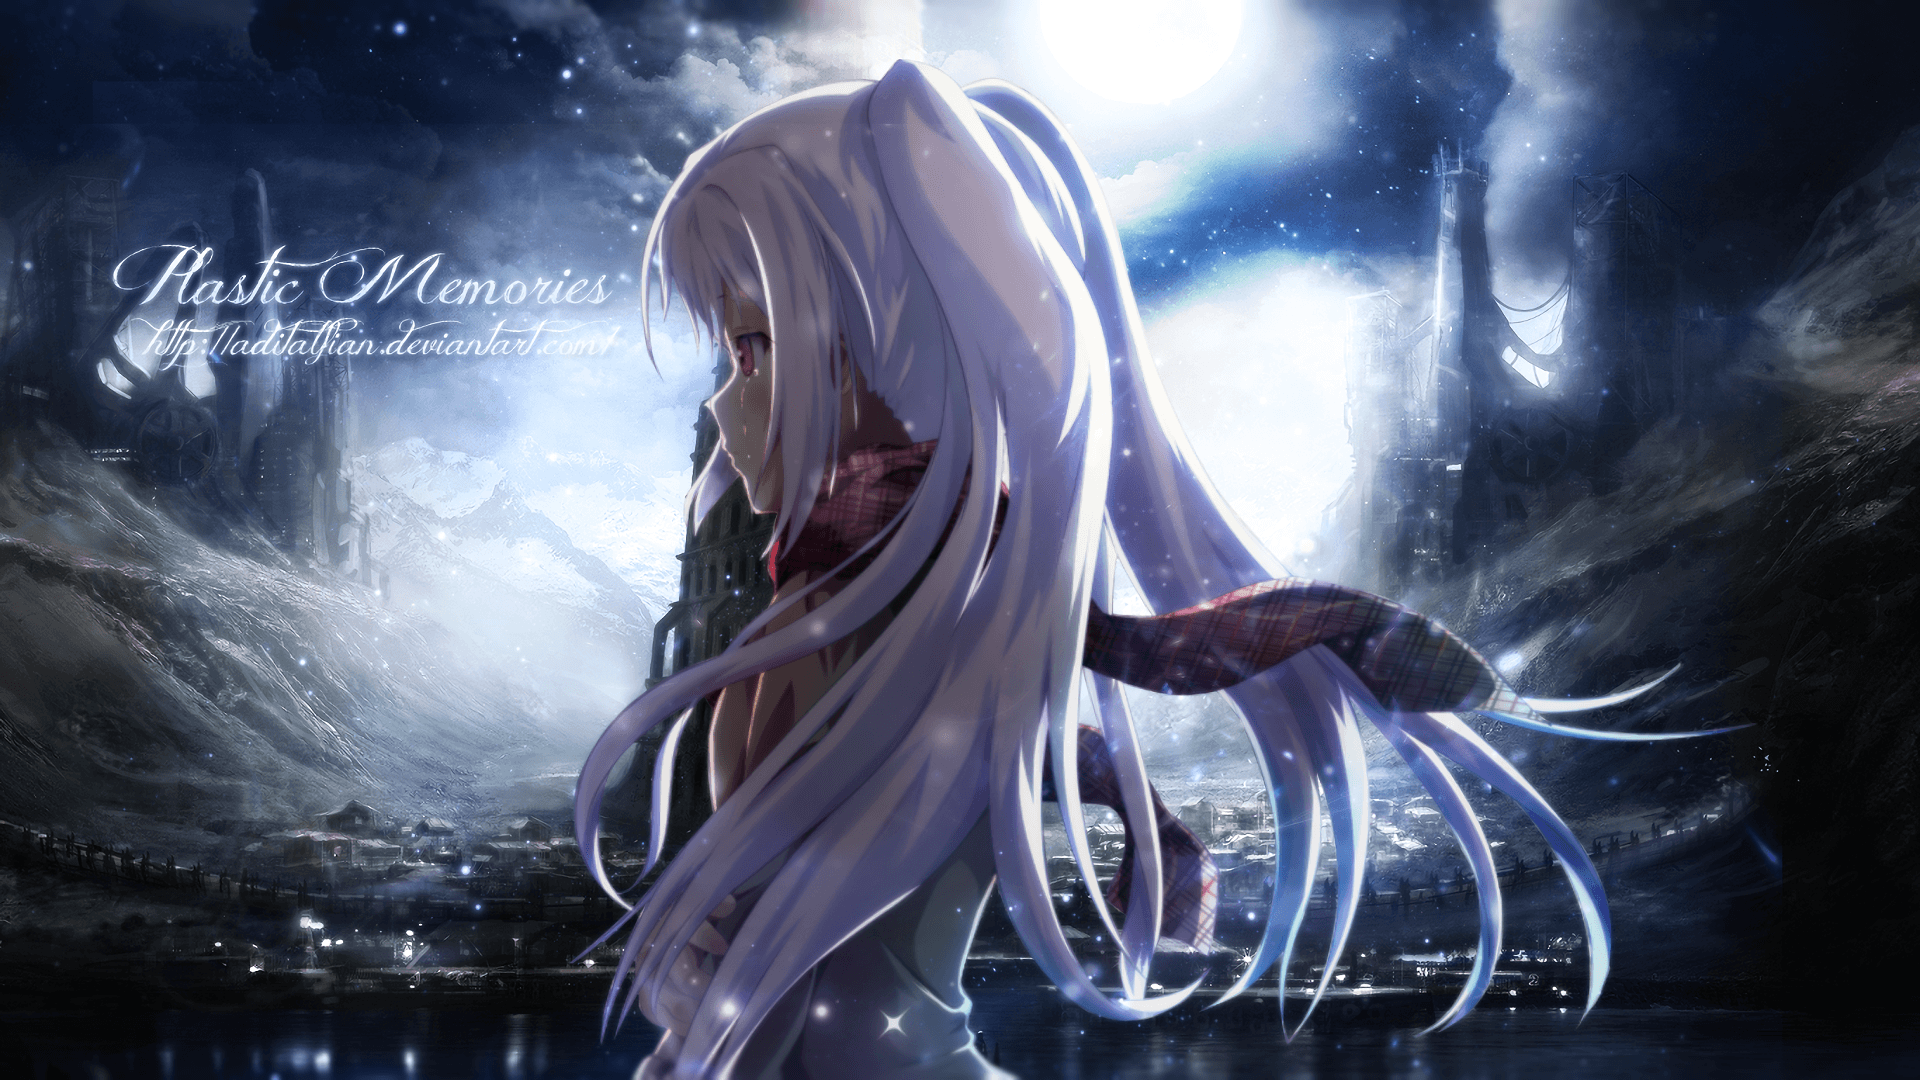 Plastic Memories HD Wallpaper and Background Image